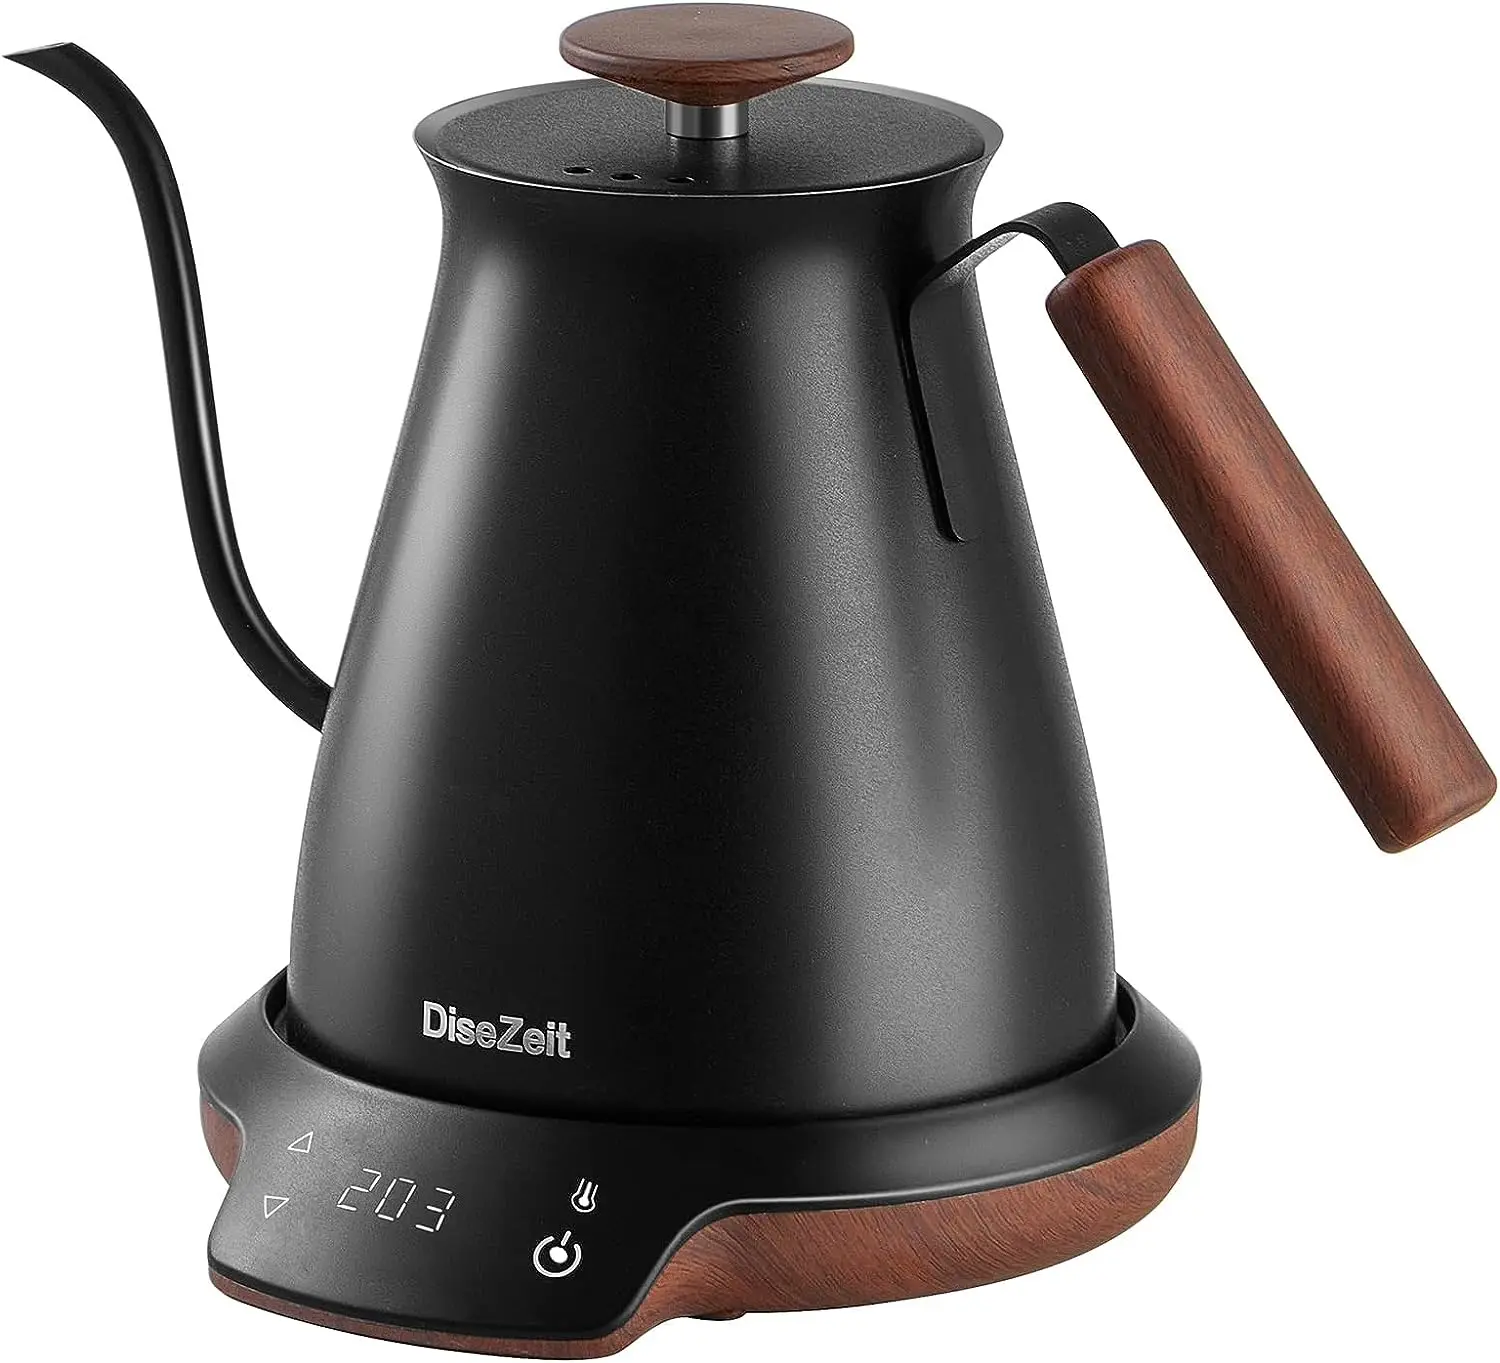 

Kettle, Retro Classic 0.7L Stainless Steel Smart Pour Over Kettle, ±1℉ Temperature Control, 1 Hour Keep Warm, Touch Control